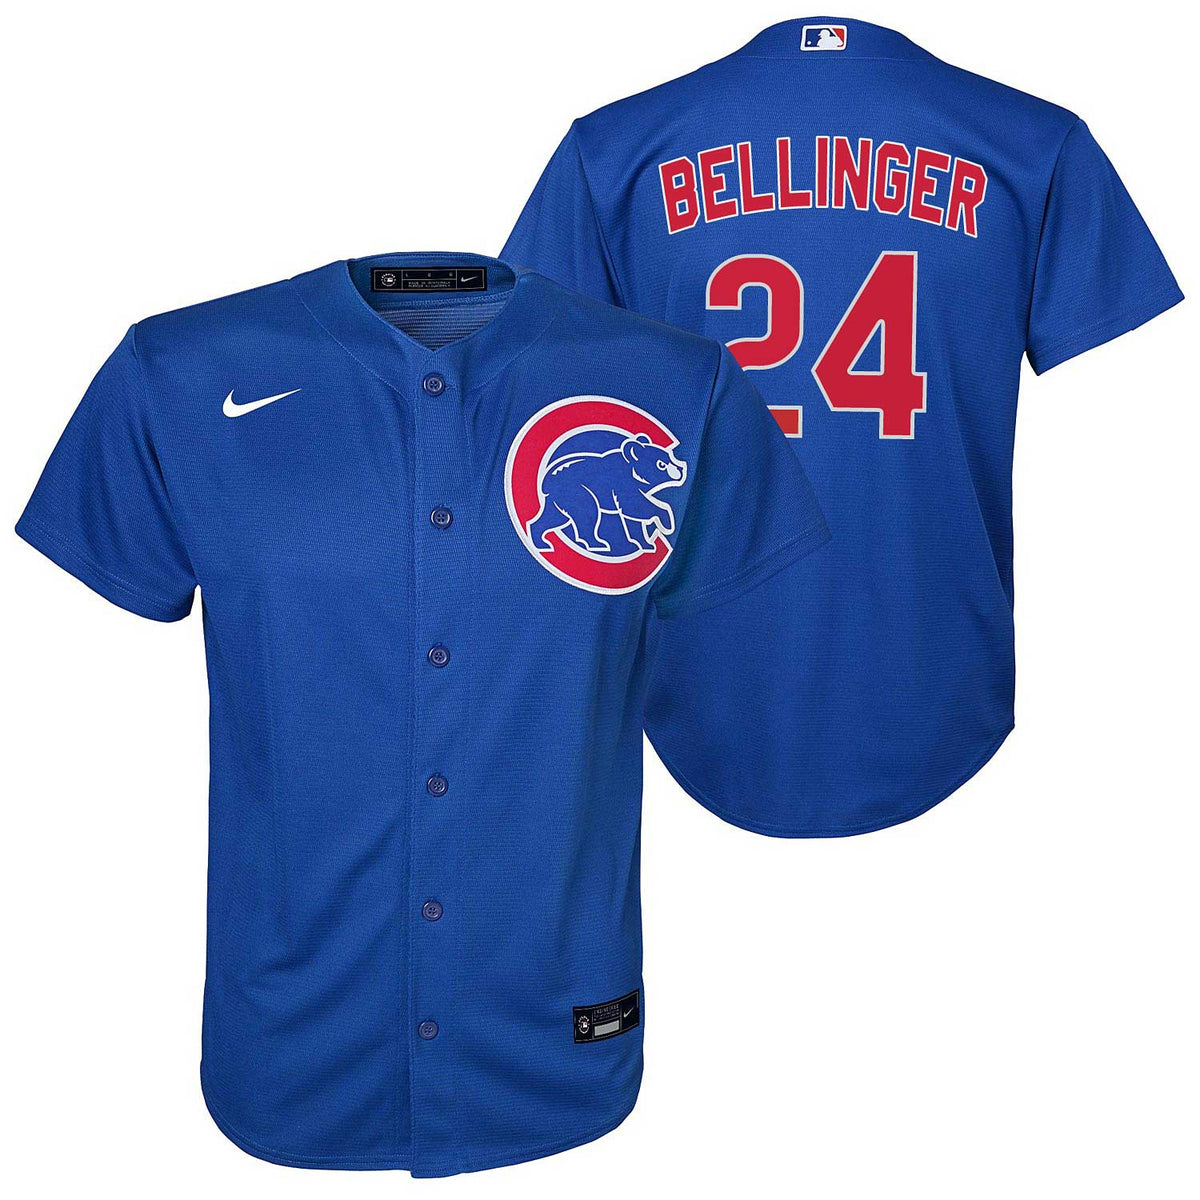 Chicago Cubs Nike Men's Cody Bellinger Home Replica Jersey 2XL